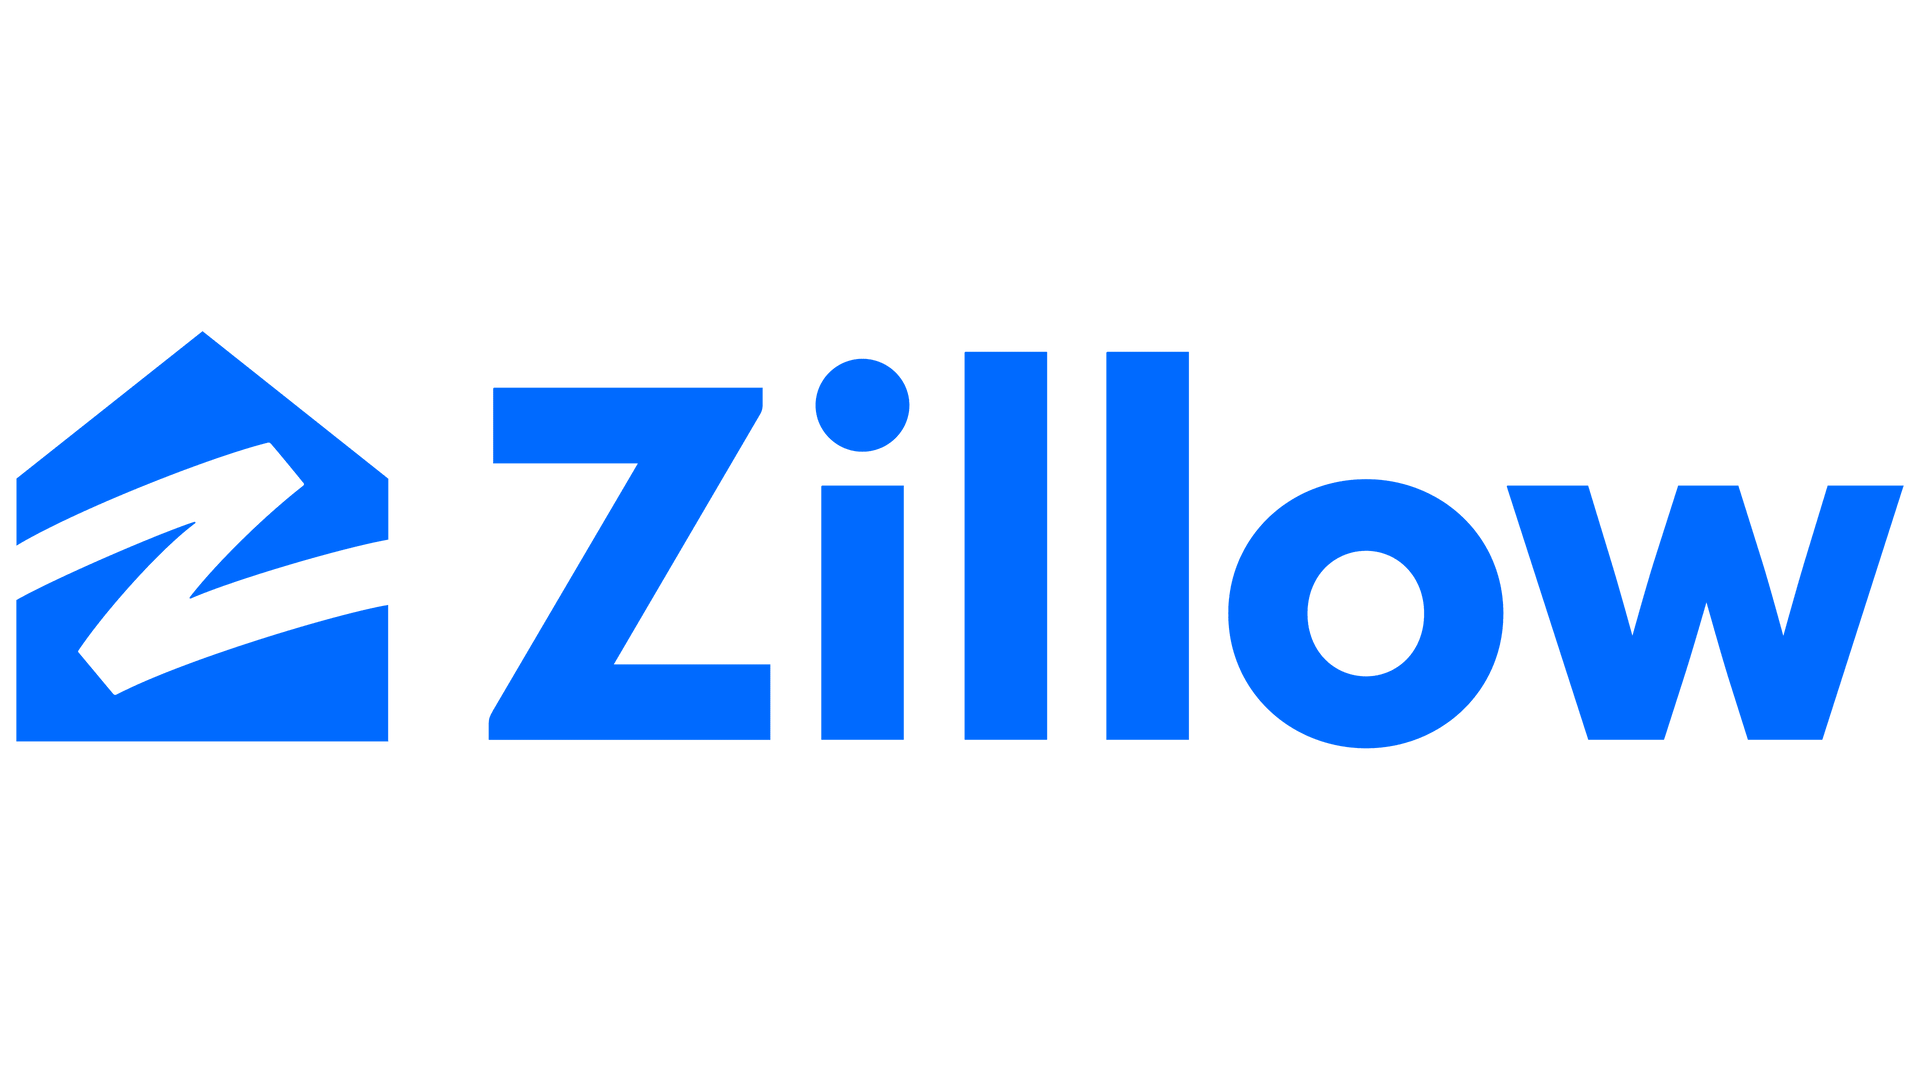 Ted Iturriria Zillow Listing